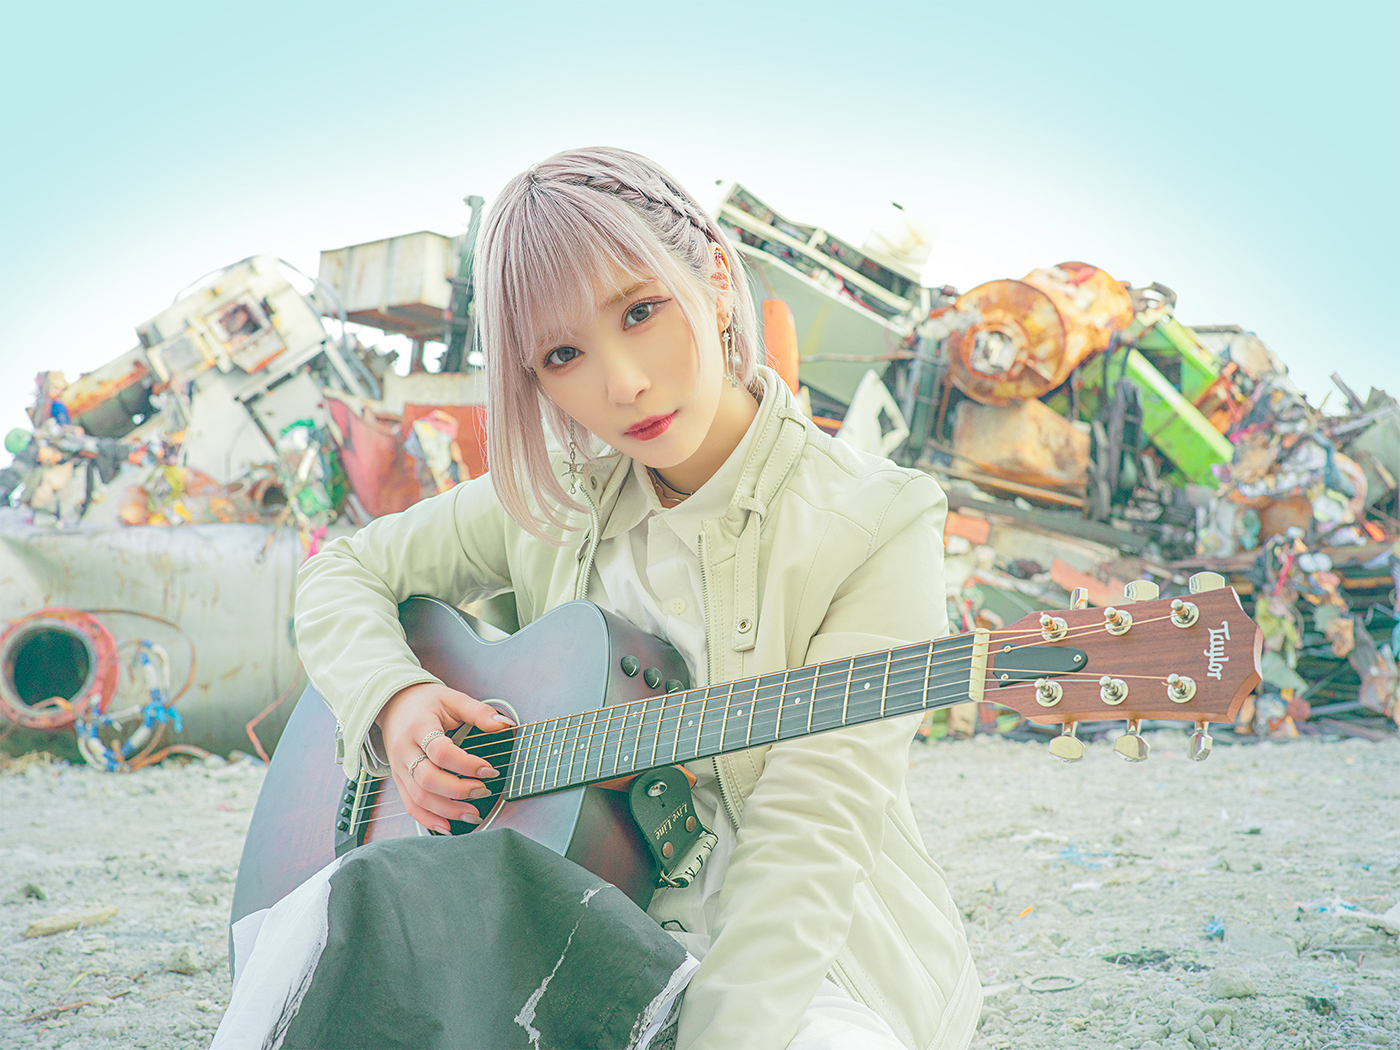 ReoNa、全国ツアー『ReoNa ONE-MAN Concert Tour 2023 “HUMAN”』開催決定 - 画像一覧（2/4）